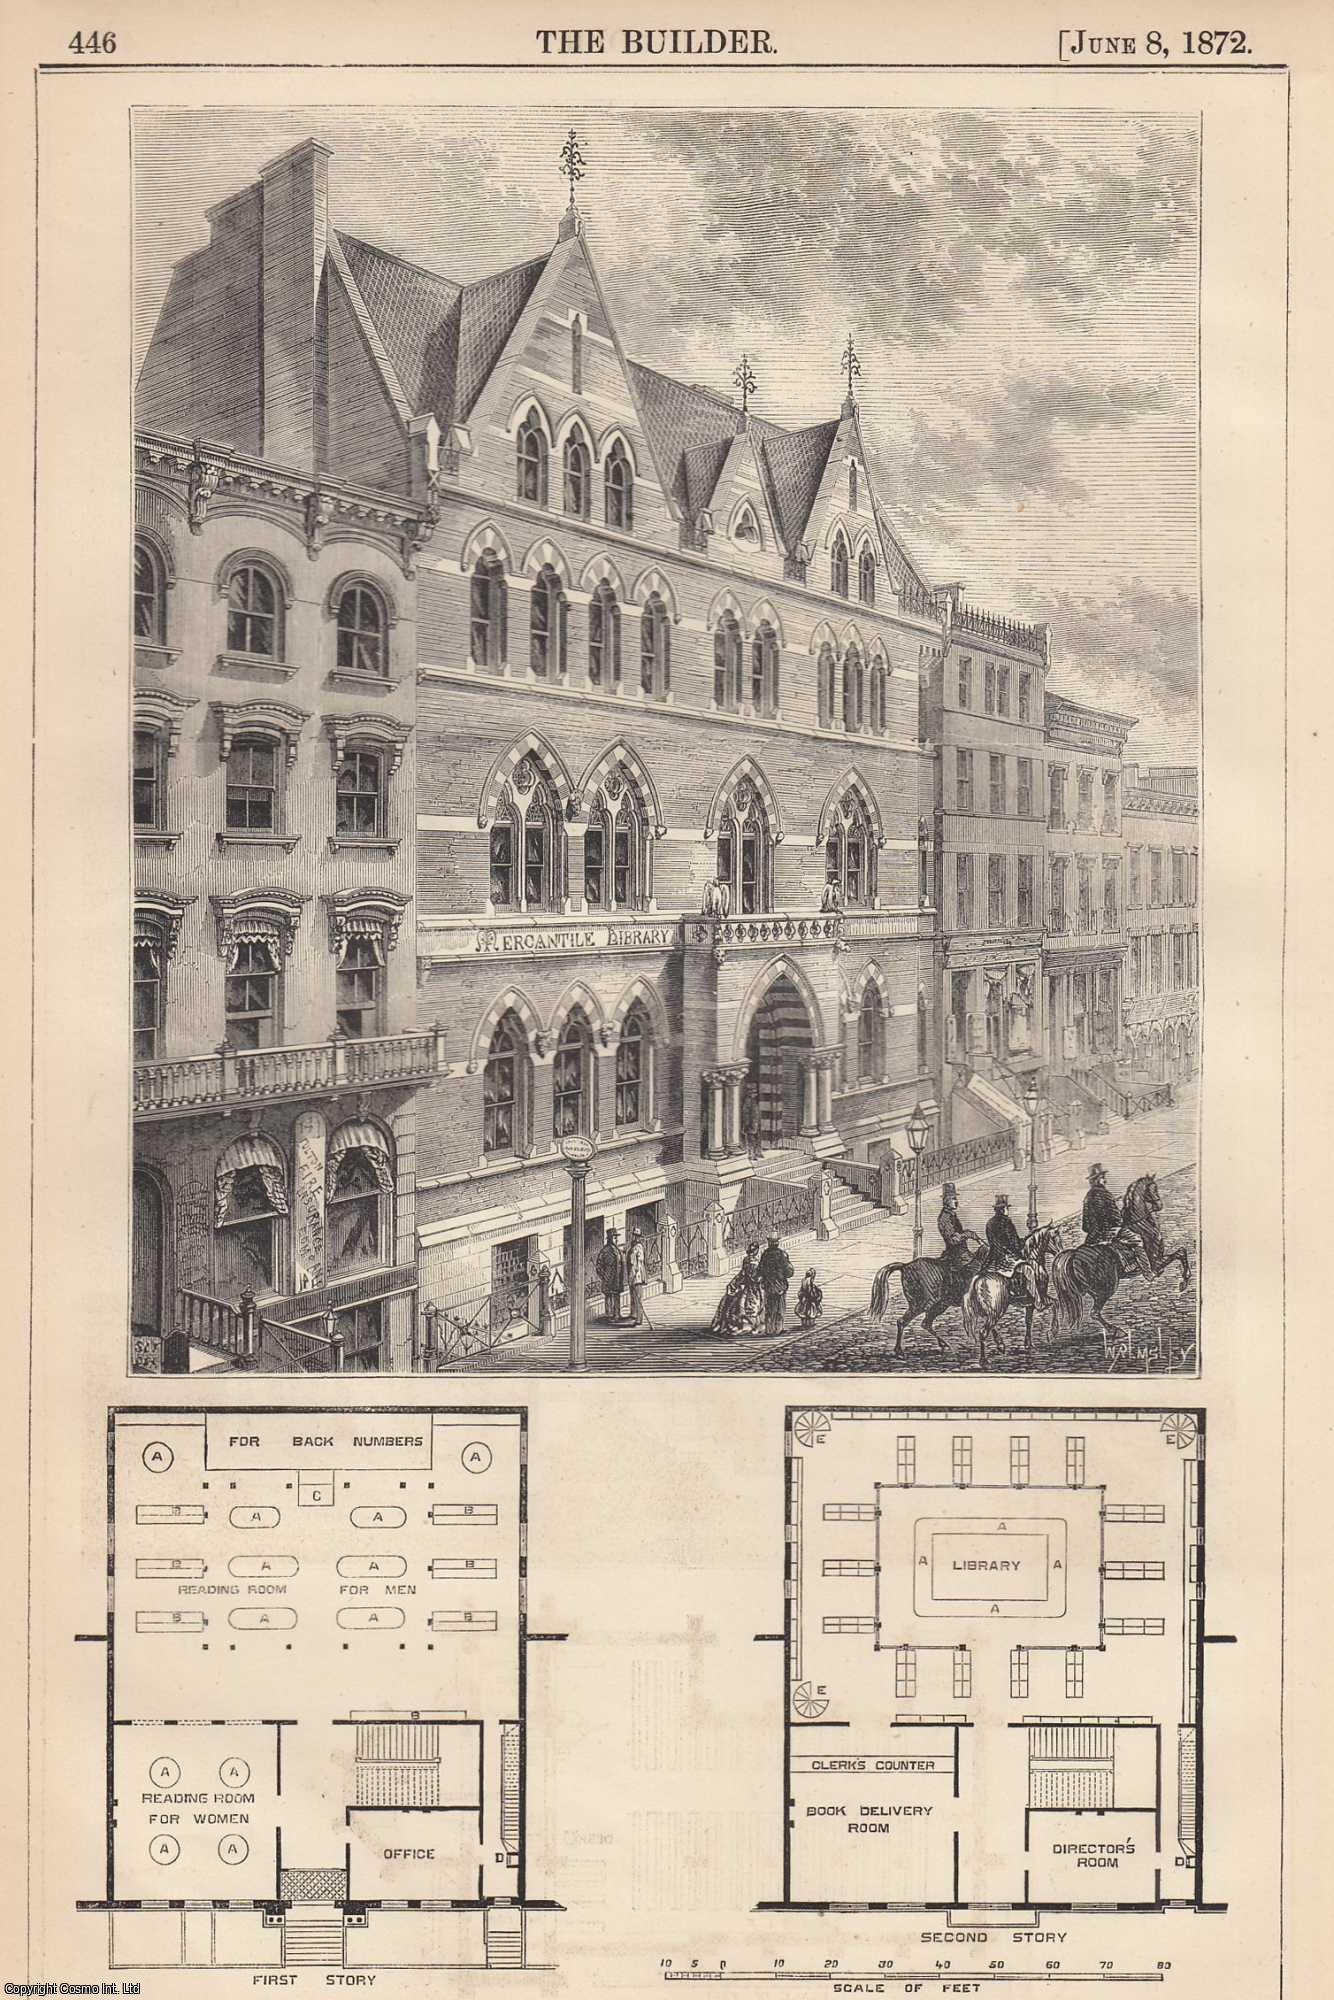 LIBRARY, NEW YORK, U.S. - 1872 : The Library Building, New York, U.S. P. B. Wight, Architect. An original page from The Builder. An Illustrated Weekly Magazine, for the Architect, Engineer, Archaeologist, Constructor, & Art-Lover.